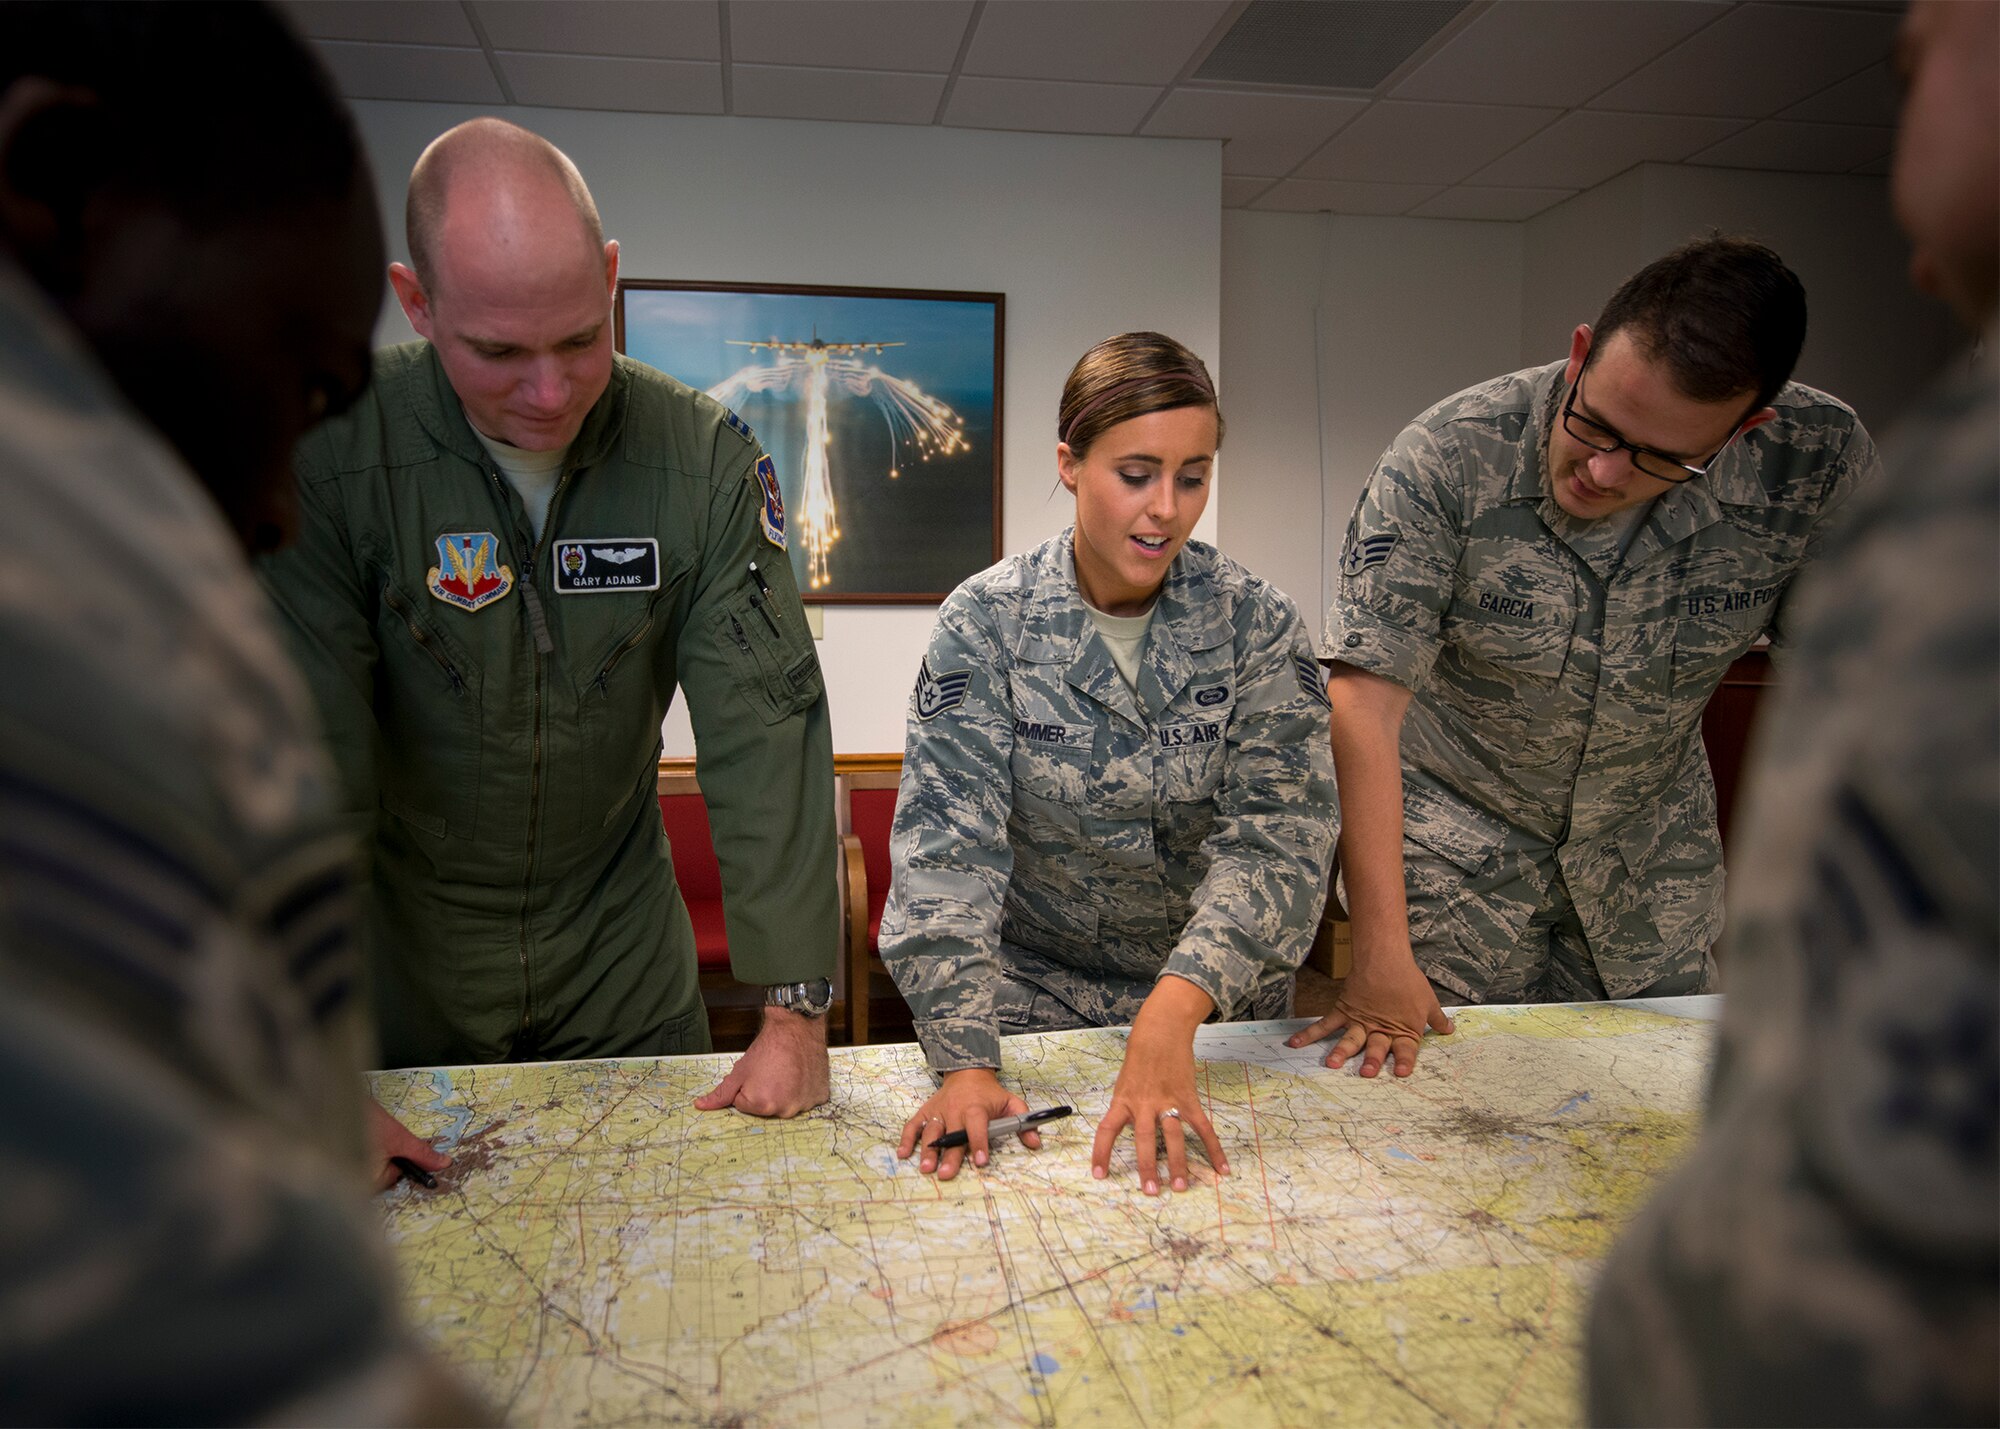 U.S. Air Force Staff Sgt. Jamie Zimmer, 347th Operations Support Squadron intelligence analyst, briefs notable locations on a map, June 29, 2016, at Moody Air Force Base, Ga. The Air Force recently selected Zimmer as one of the service’s 12 Outstanding Airmen of the Year award recipients. (U.S. Air Force photo by Senior Airman Ryan Callaghan)